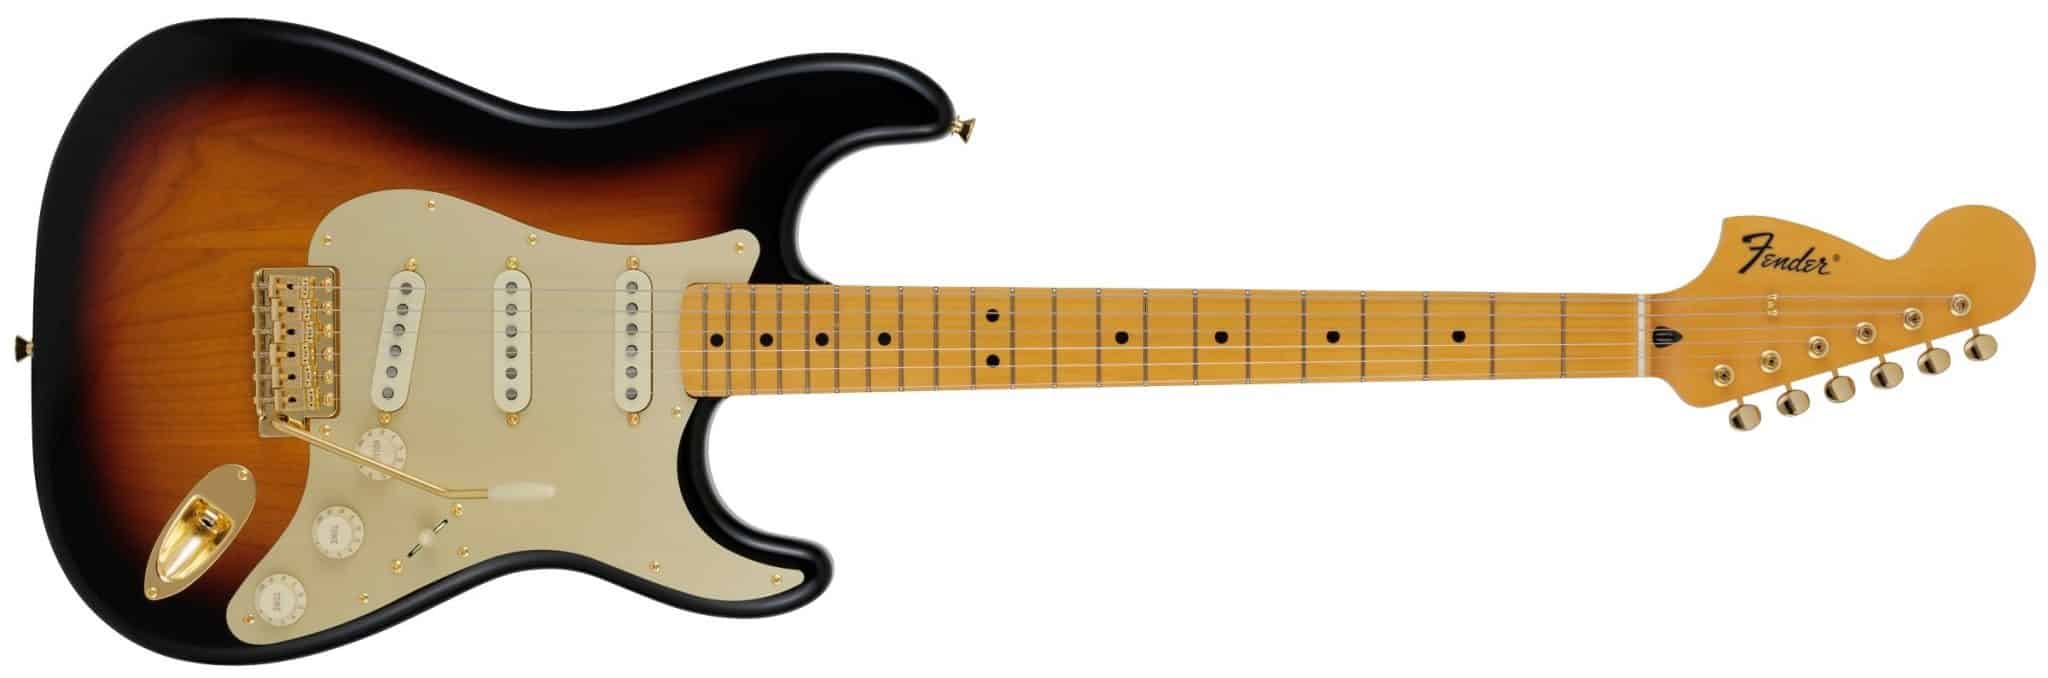 Fender Traditional Stratocaster Reverse Head